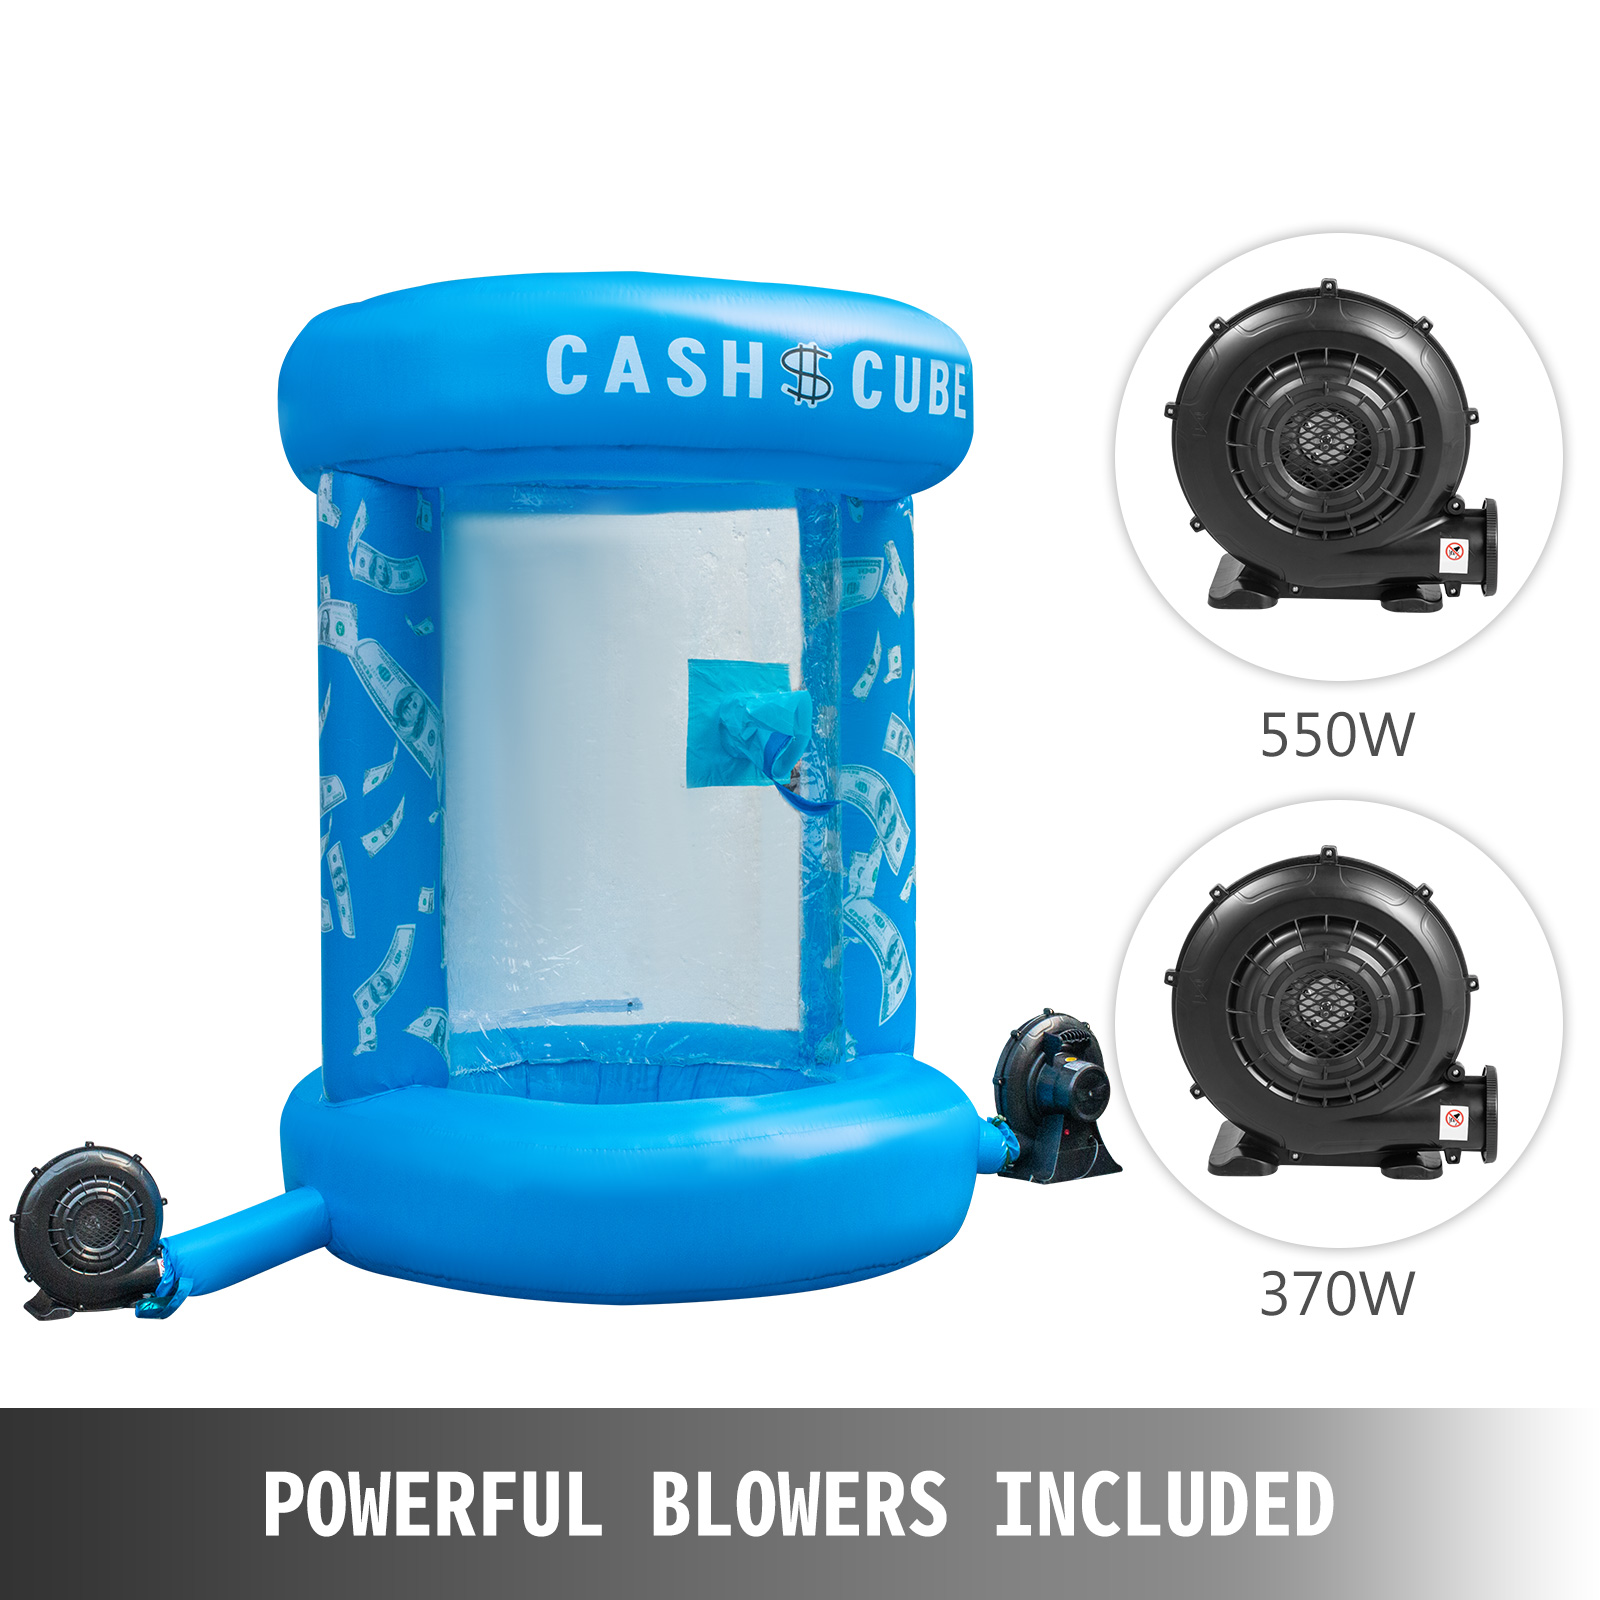 9ft Inflatable Cash Cube Money Machine Advertising Promotion with Blowers 